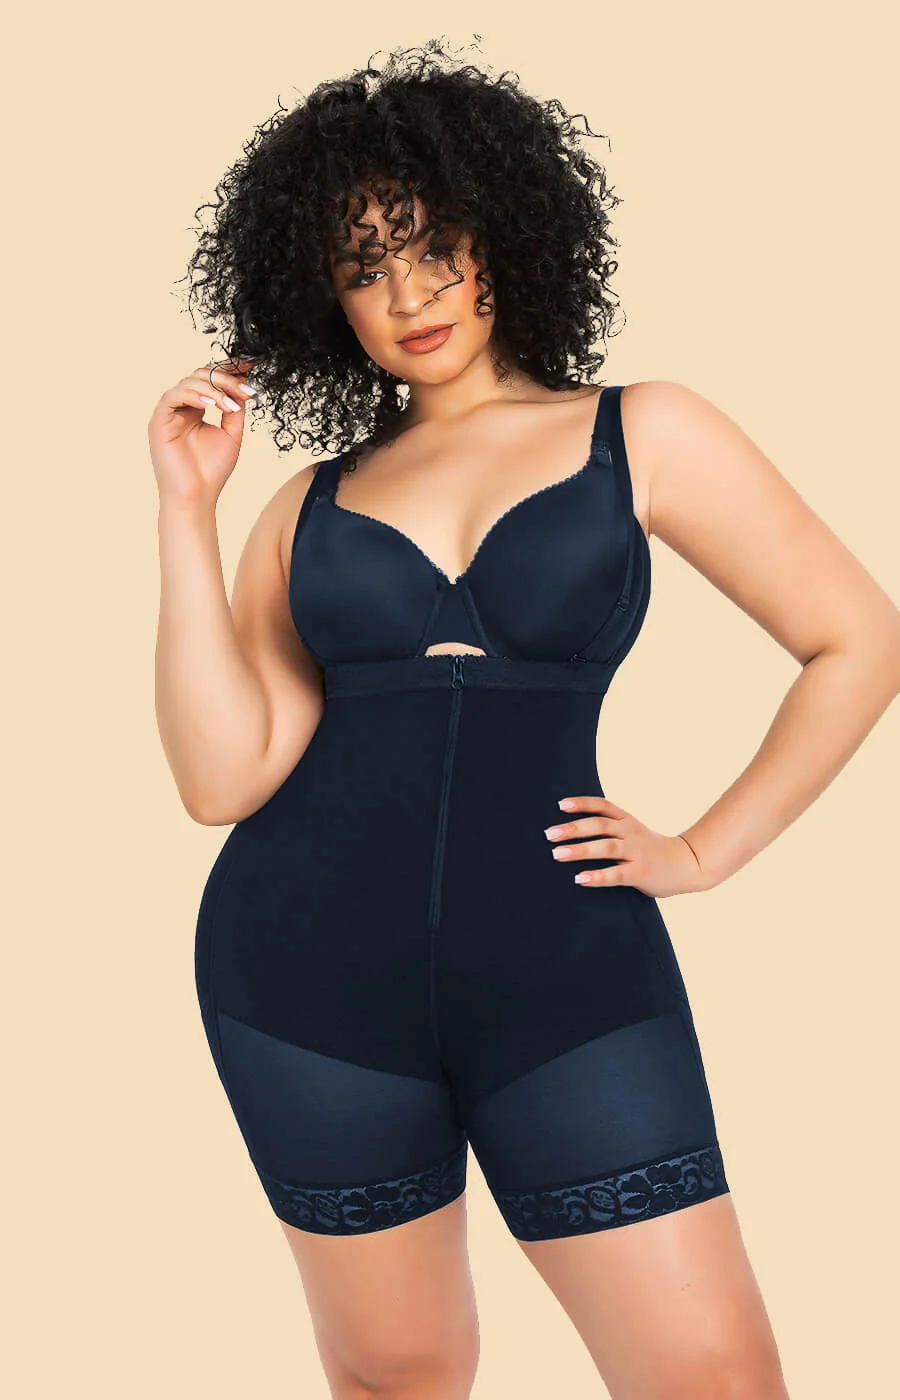 barenkul™ Firm Tummy Compression Bodysuit Shaper With Butt Lifter